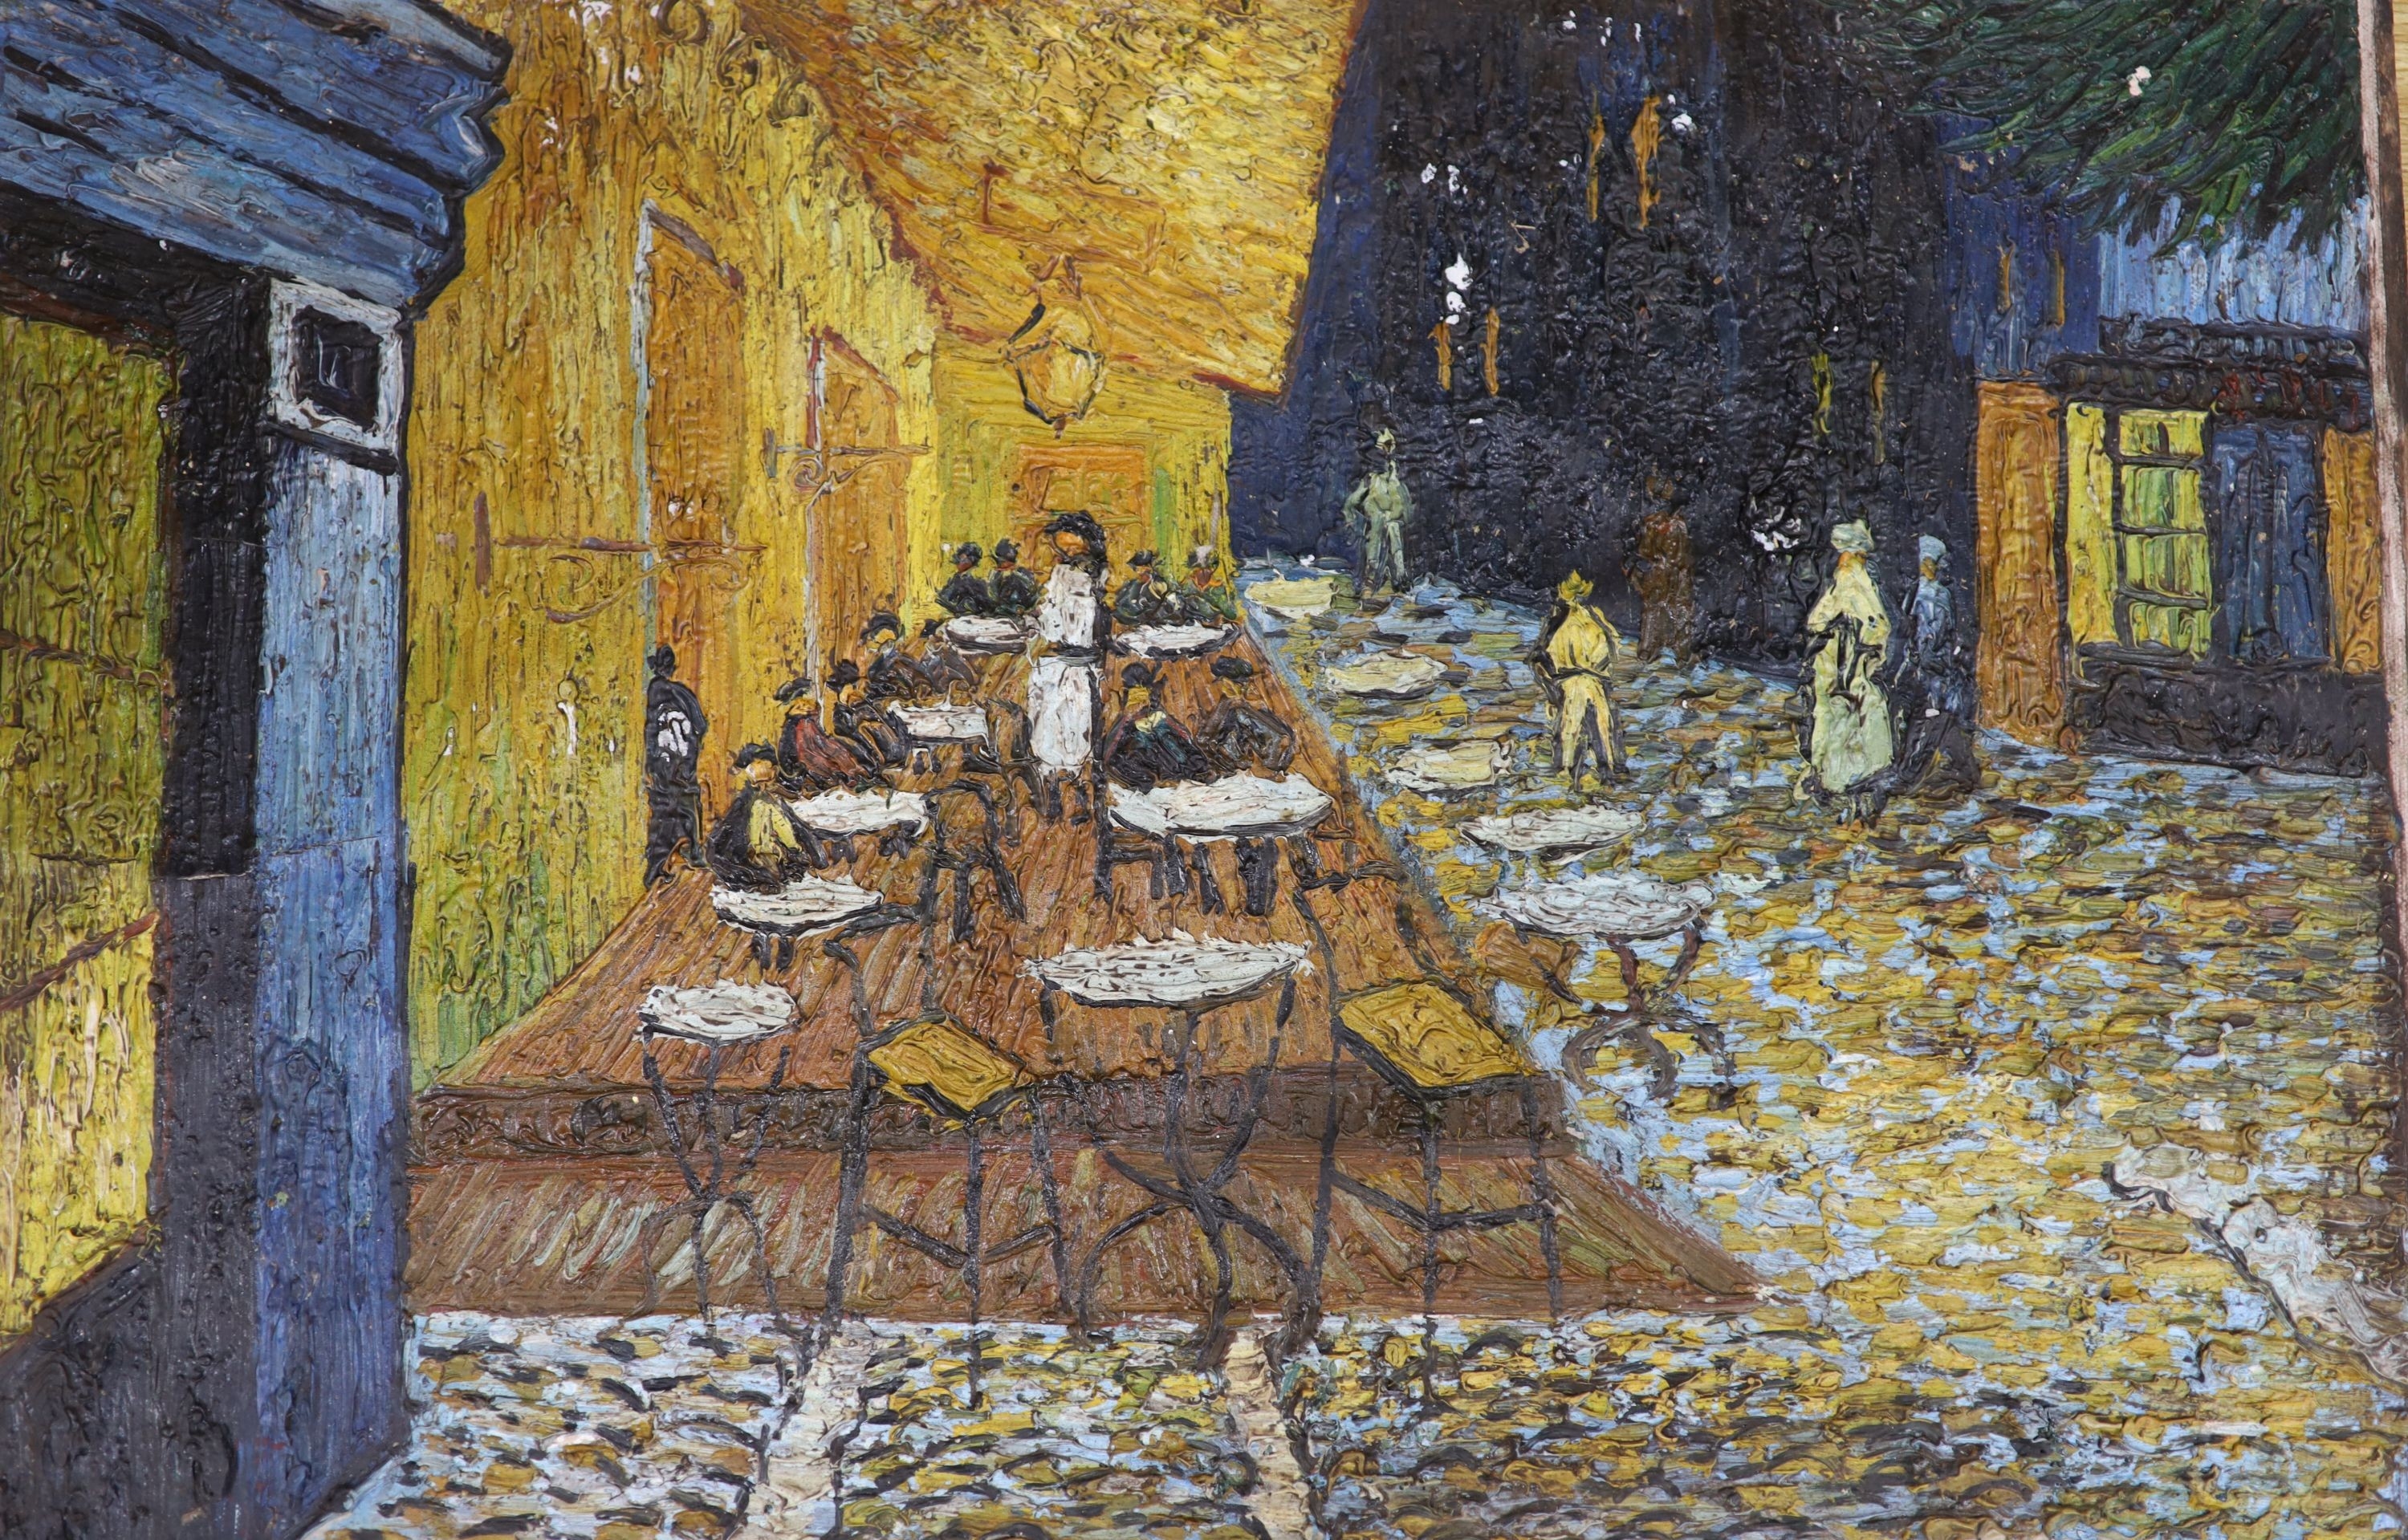 Artwork by Vincent van Gogh, Cafe Terrace at Night, Made of oil on canvas laid on board